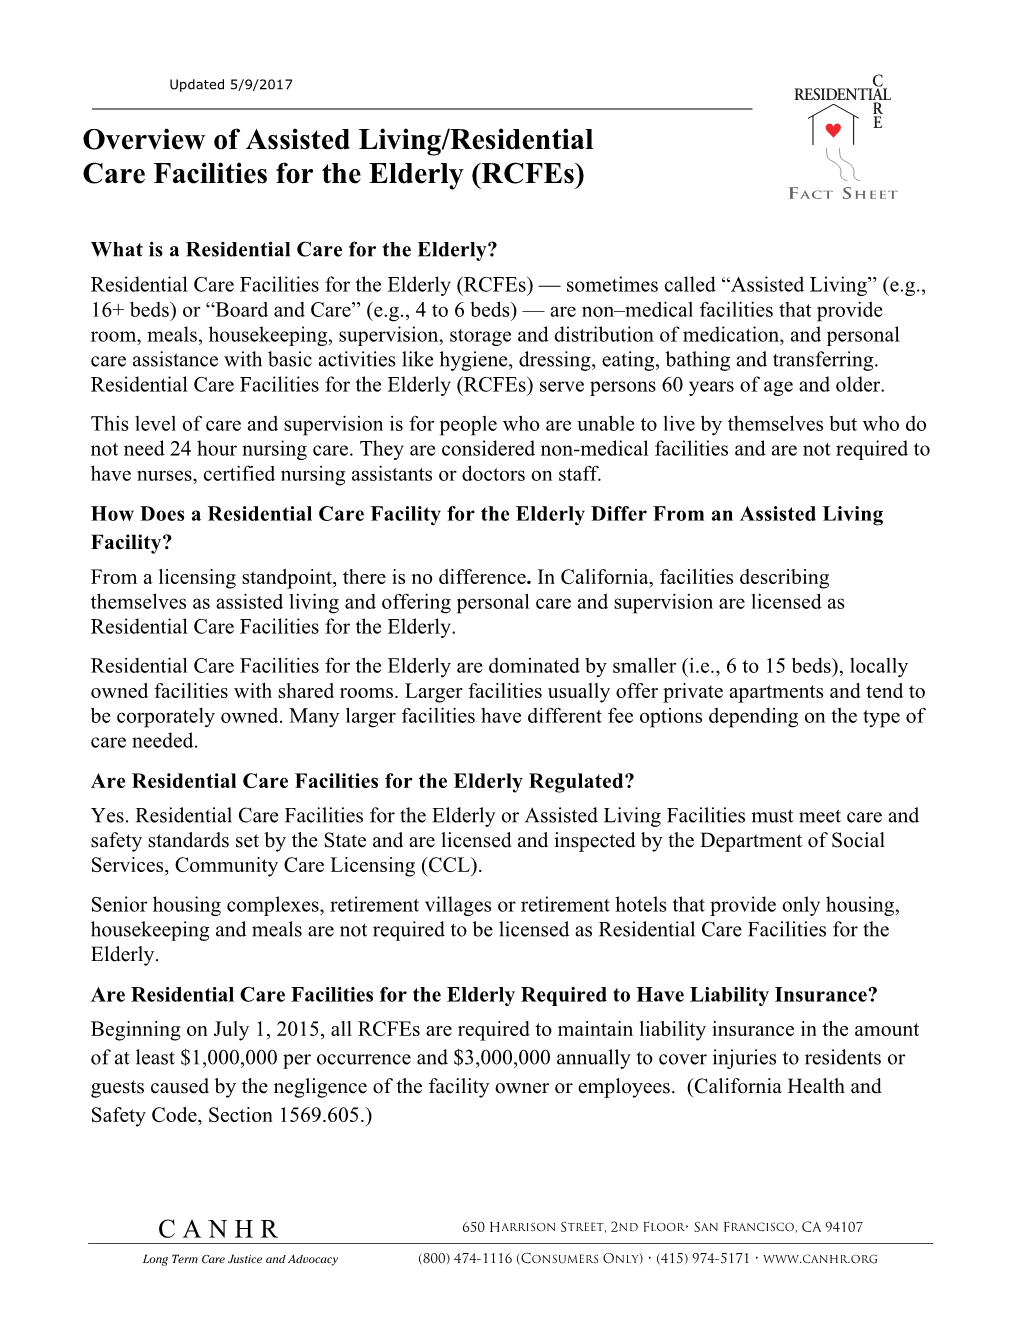 Overview of Assisted Living/Residential Care Facilities for the Elderly (Rcfes)